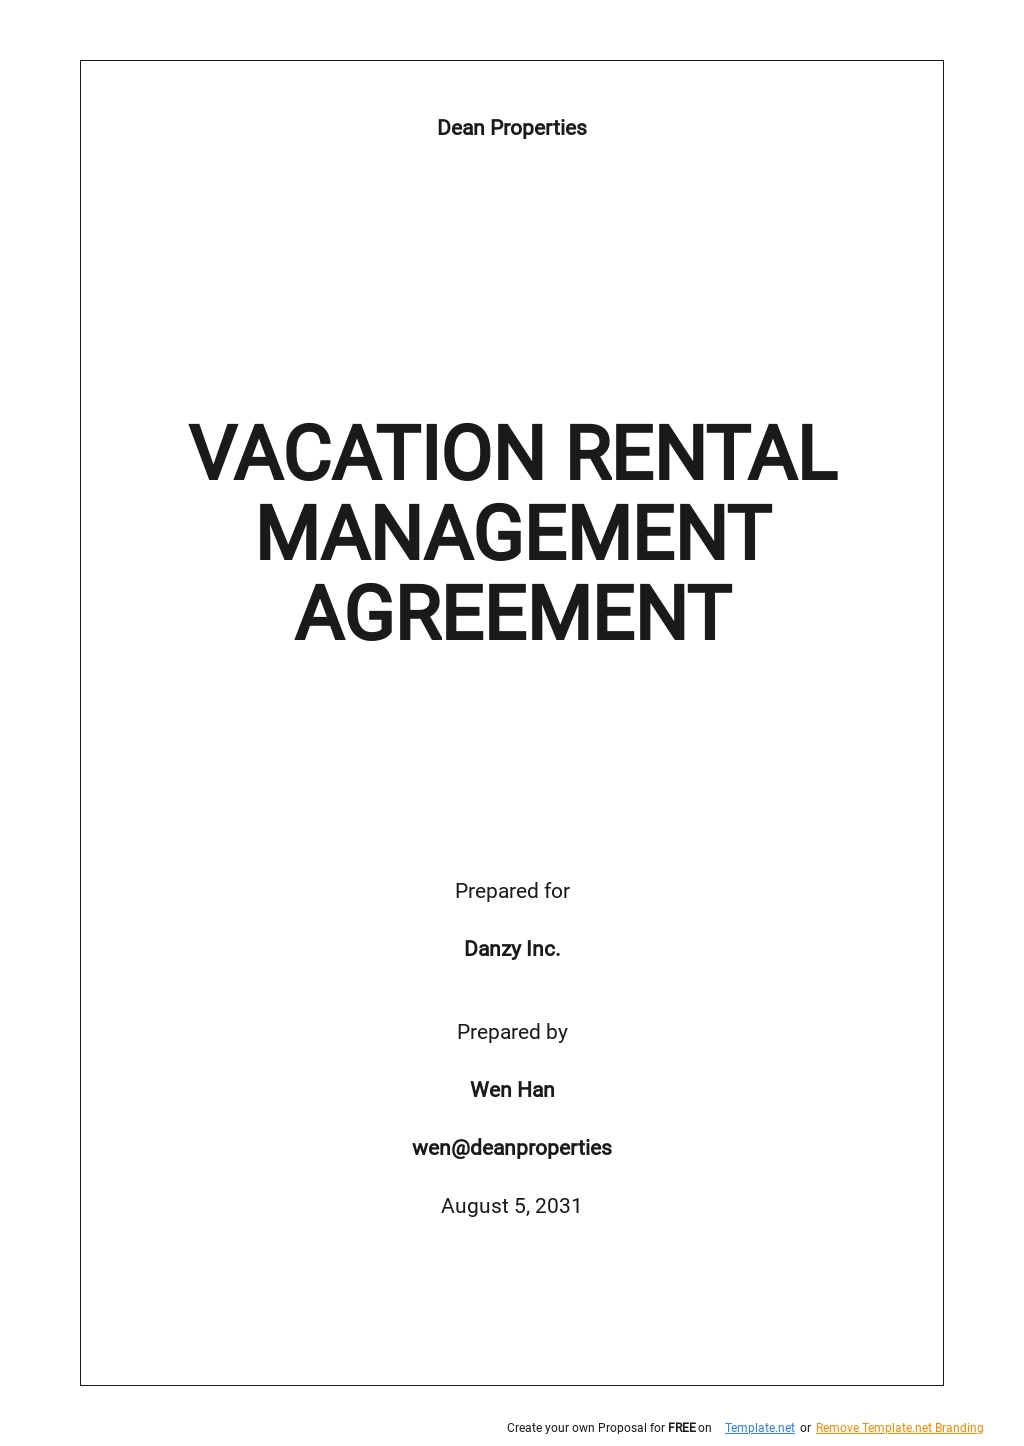 Vacation Rental Property Management Agreement Template.jpe